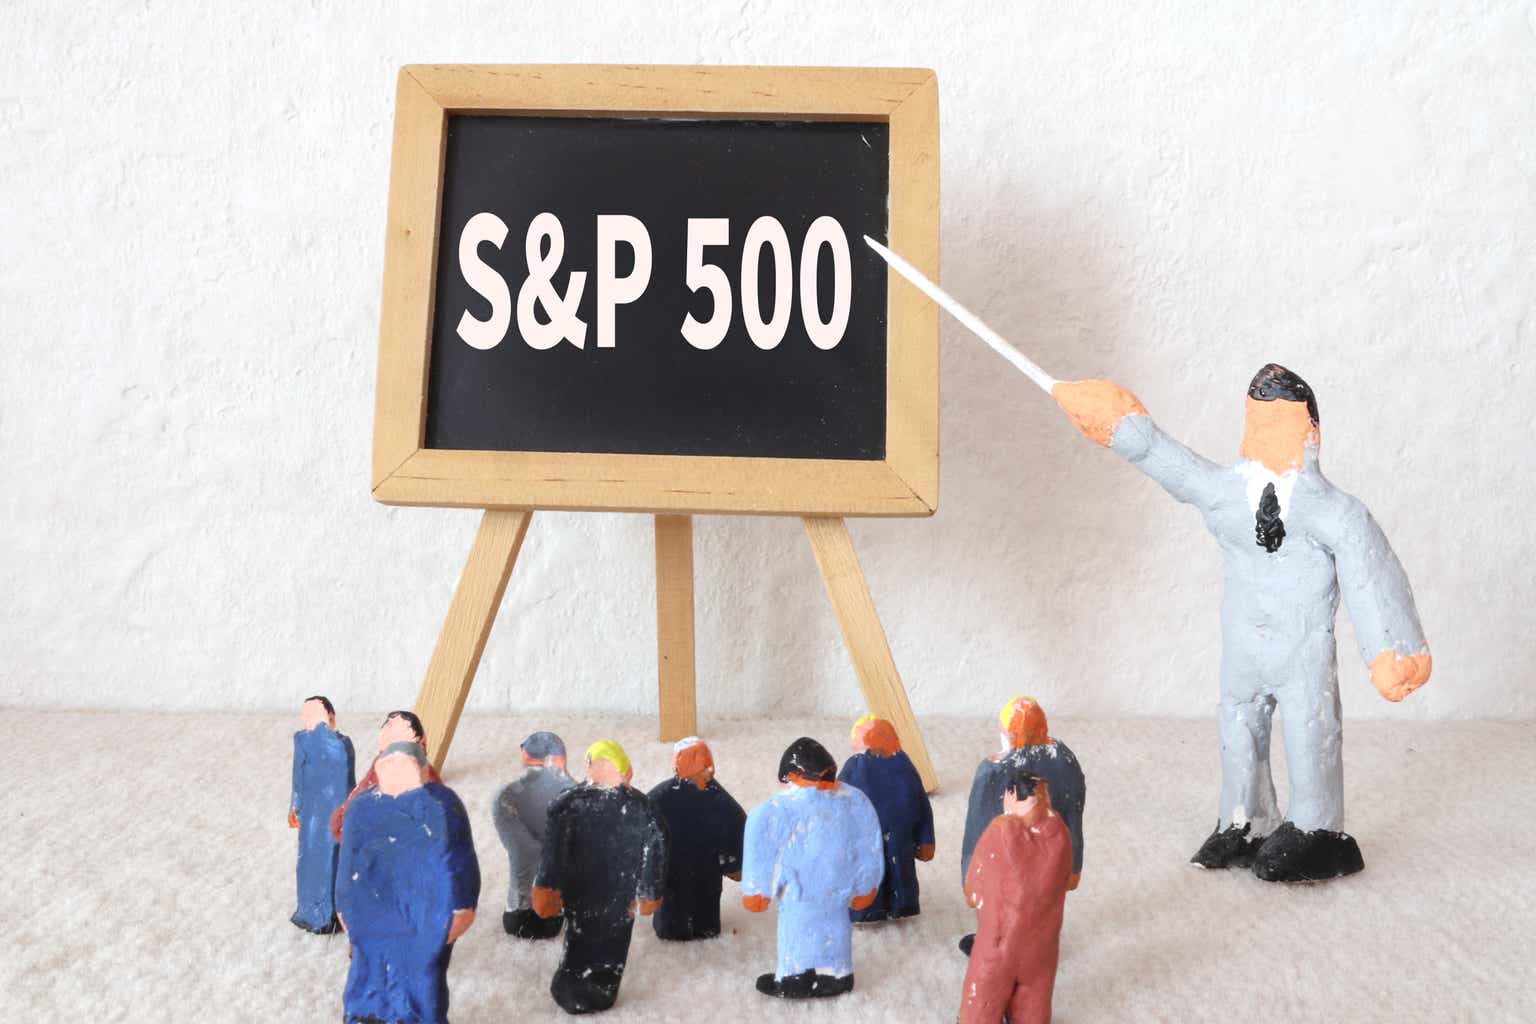 IVV: The S&P 500 Is Not Expensive